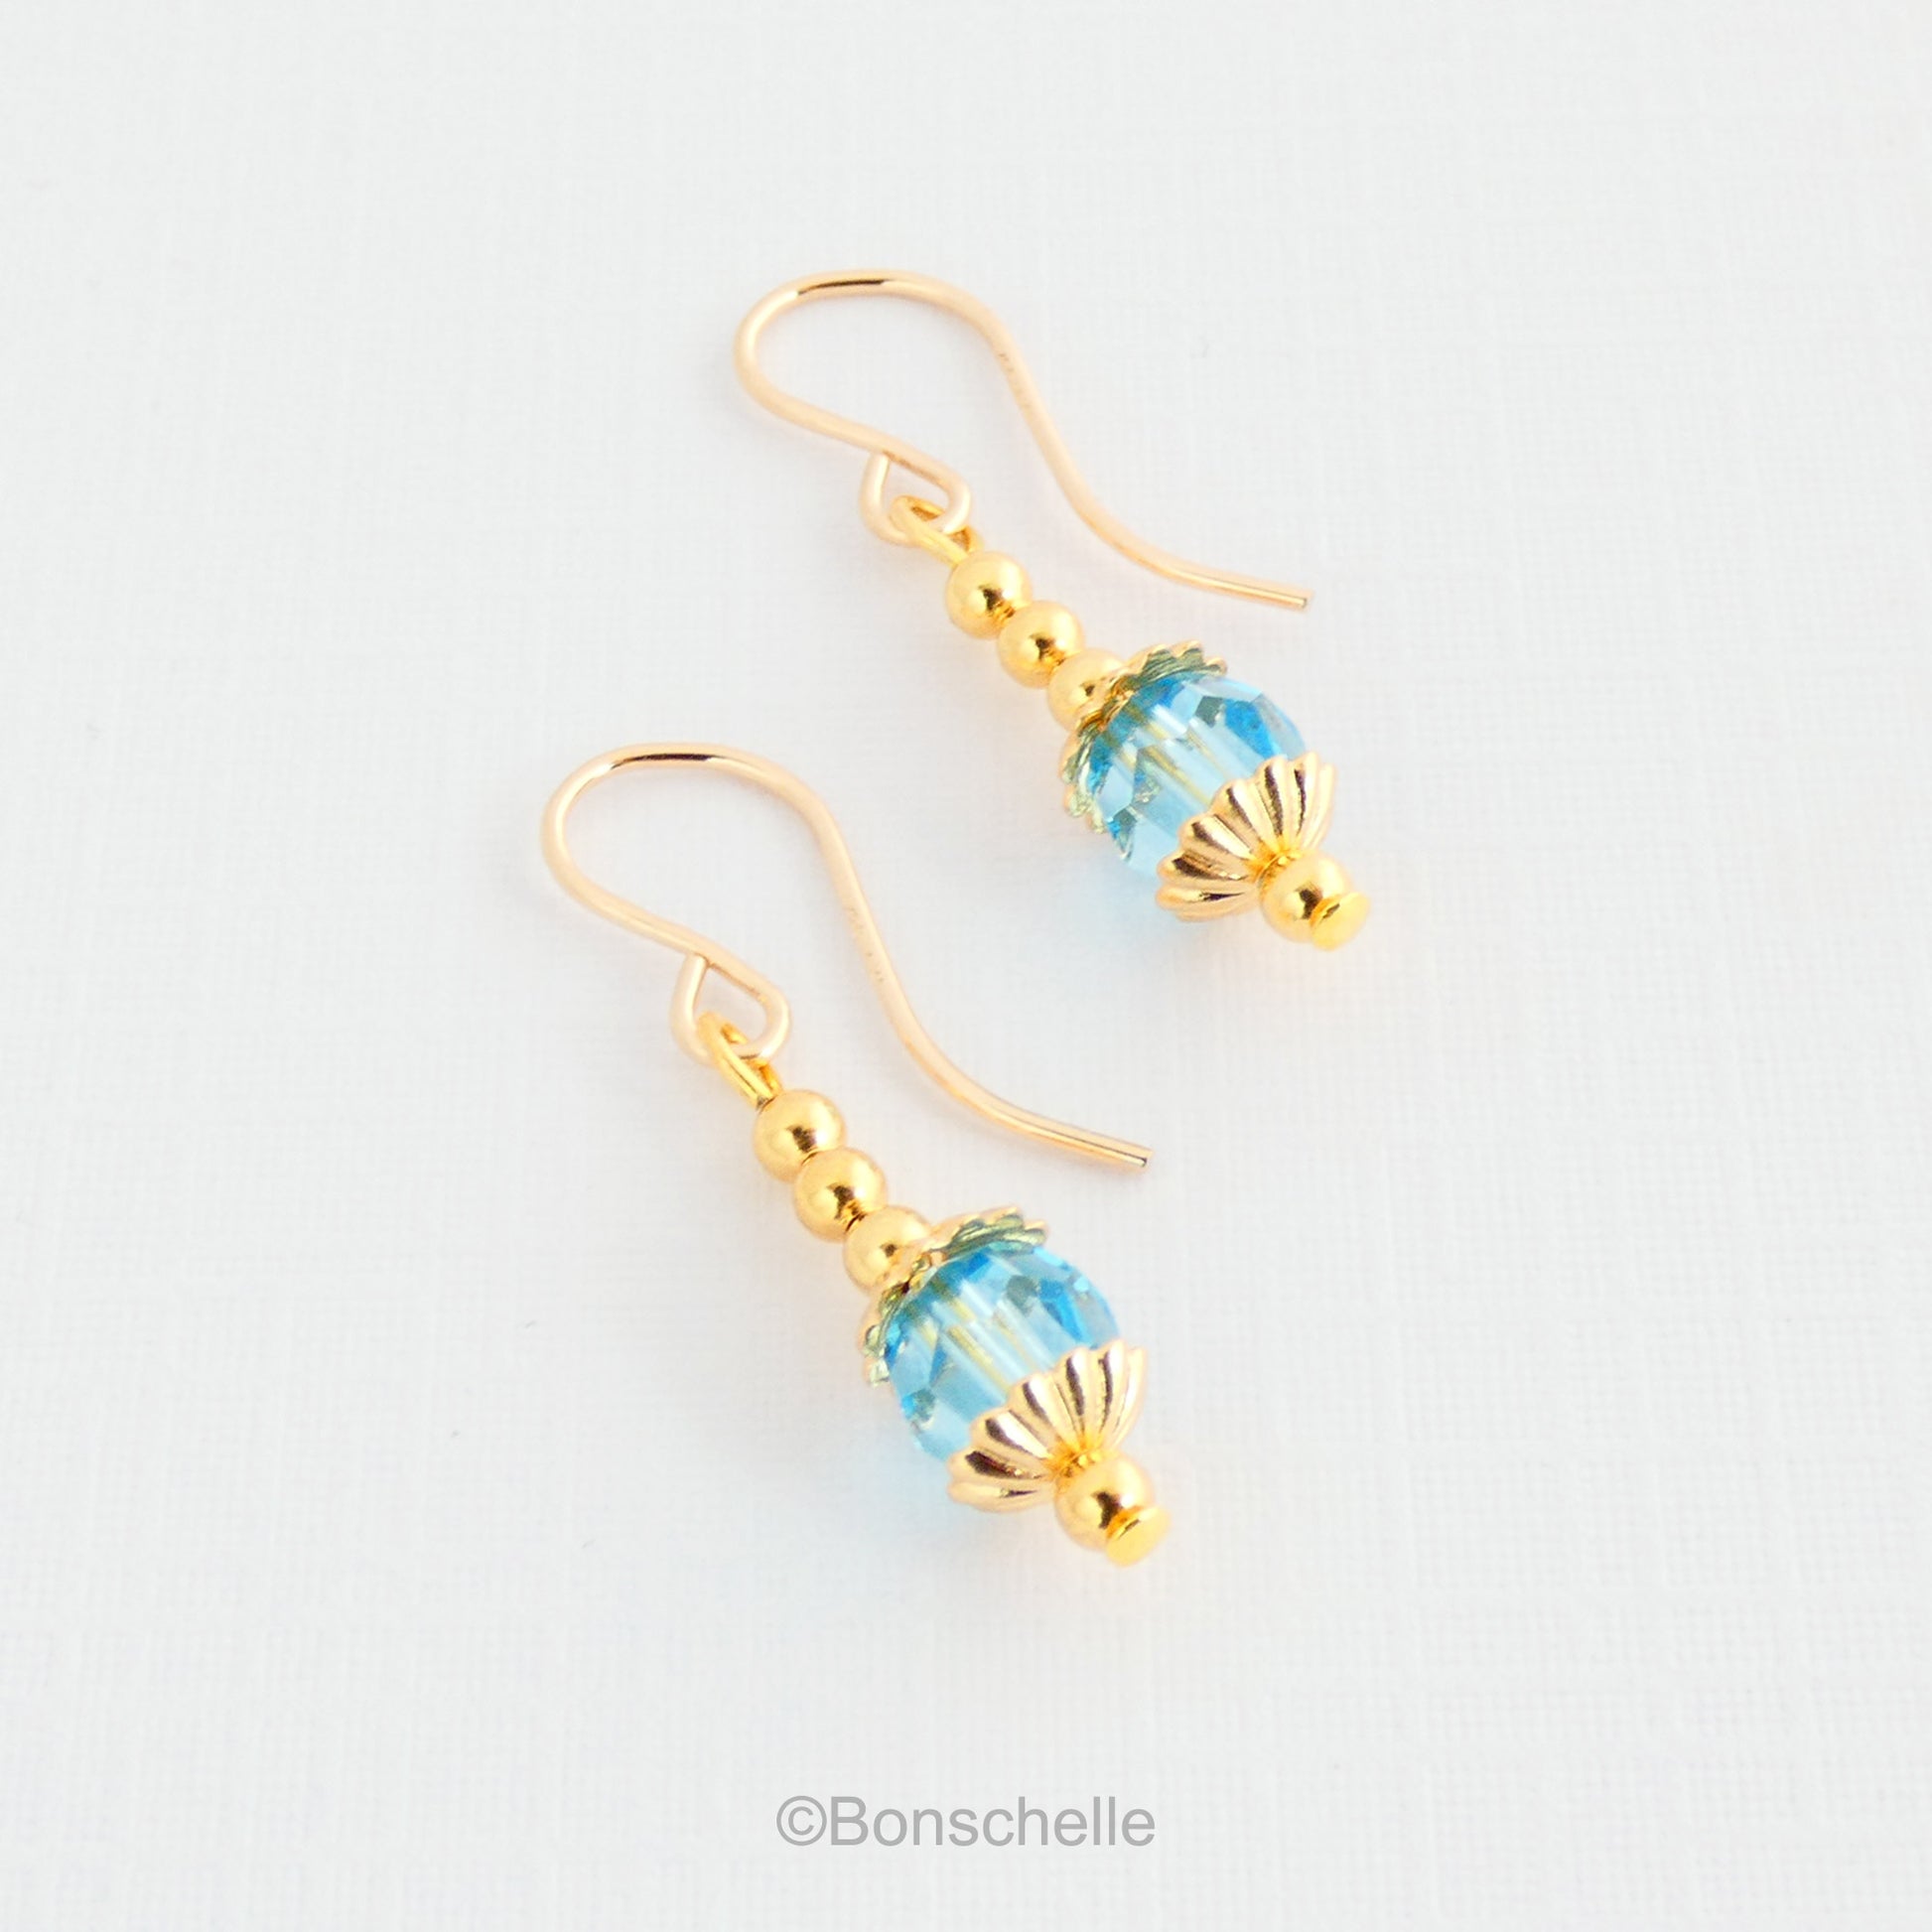 Handmade dangle earrings made with turquoise coloured Swarovski cut glass crystal faceted beads, small gold toned beads and 14K gold filled earwires.